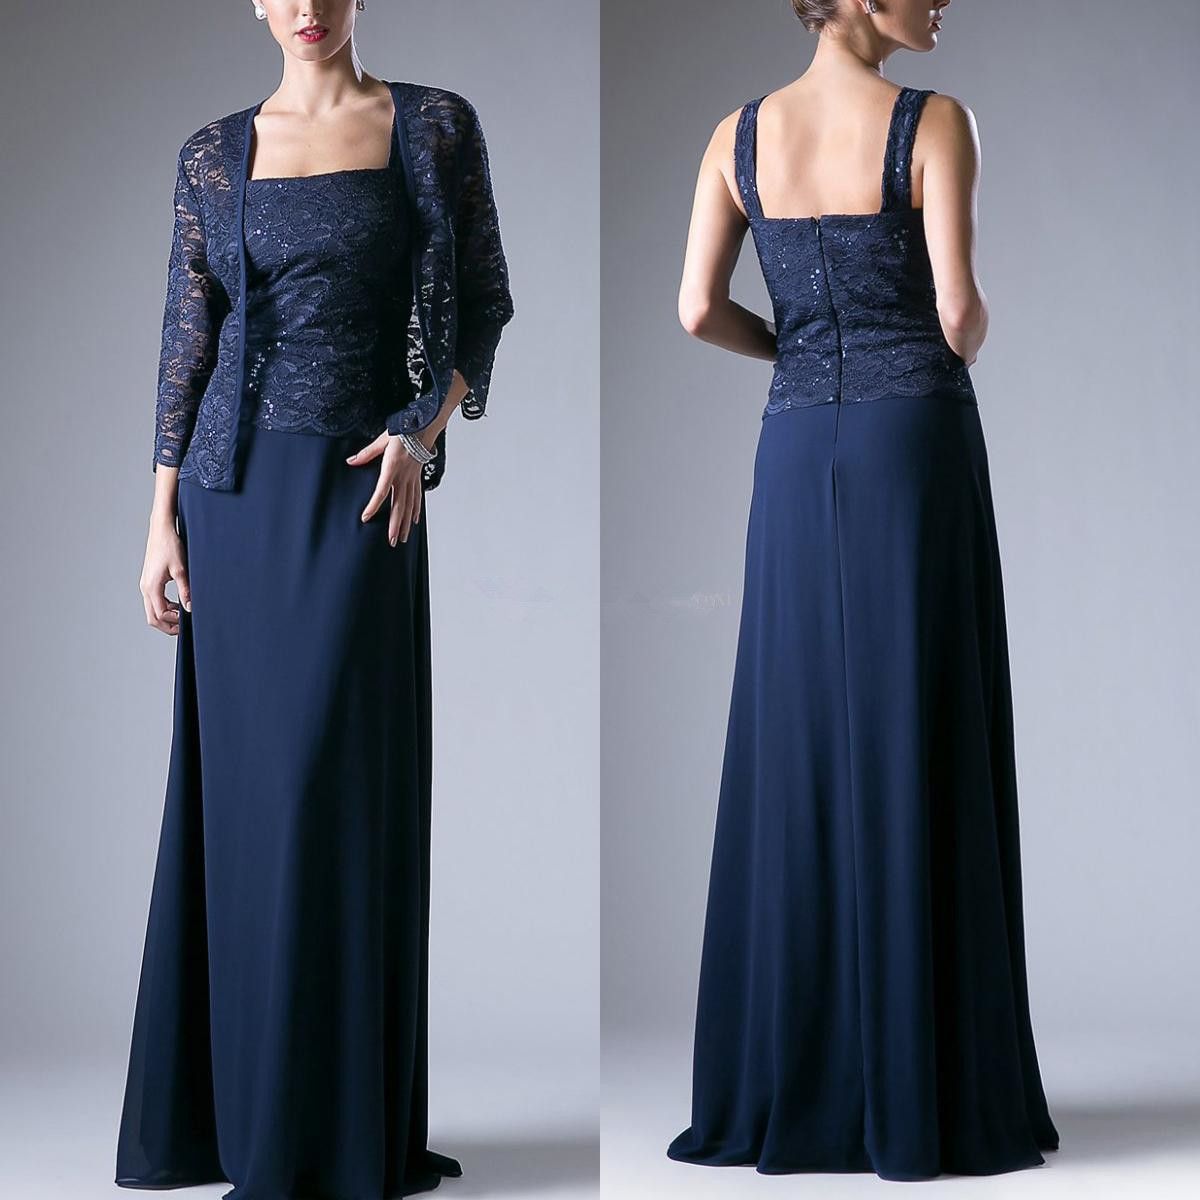 mother of the bride long navy dress